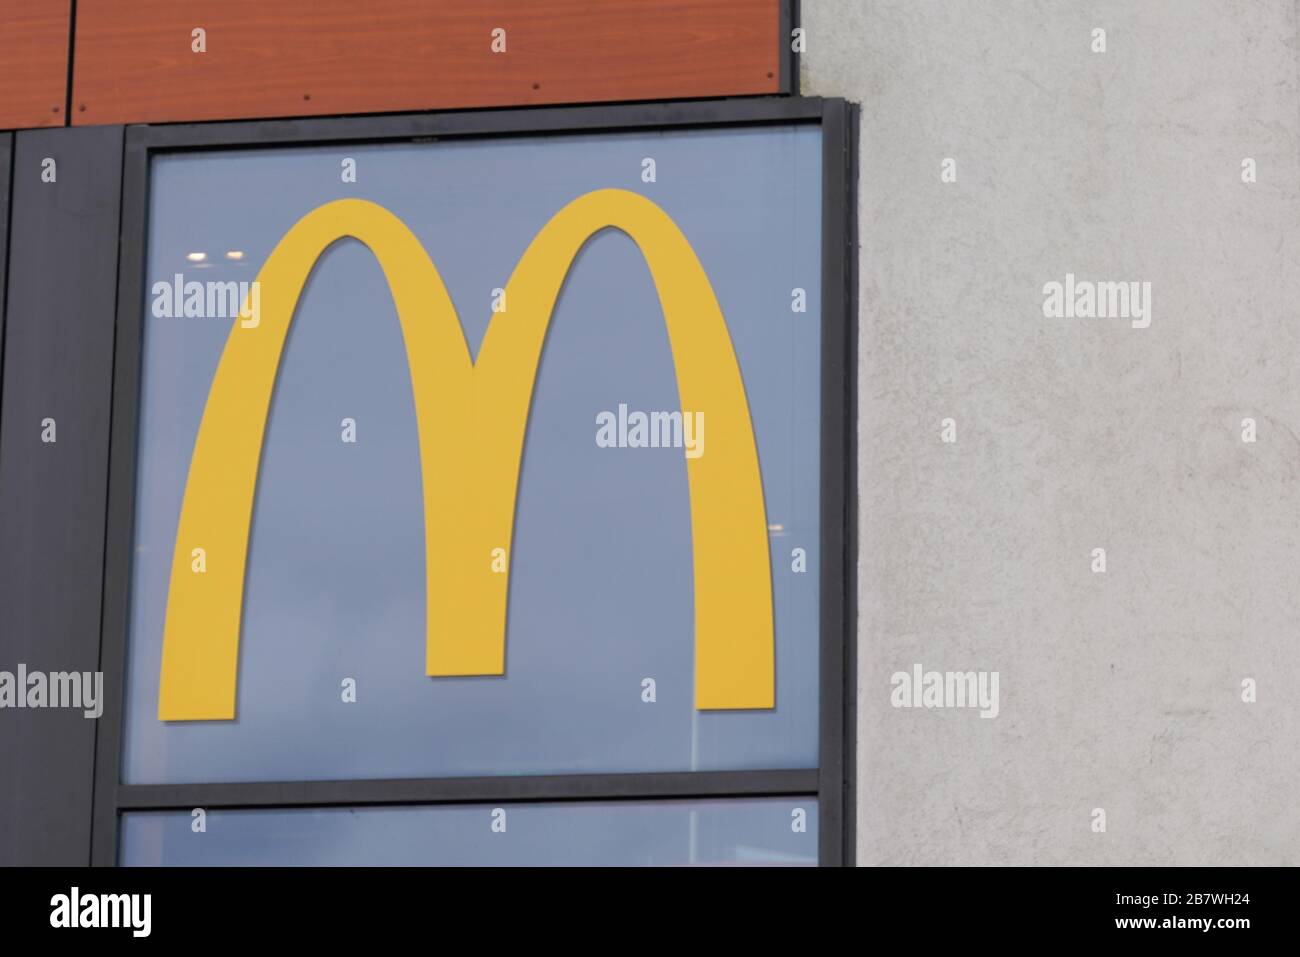 Bordeaux , Aquitaine / France - 11 18 2019 : Mac Donald  commercial sign store brand fast food logo restaurant Stock Photo